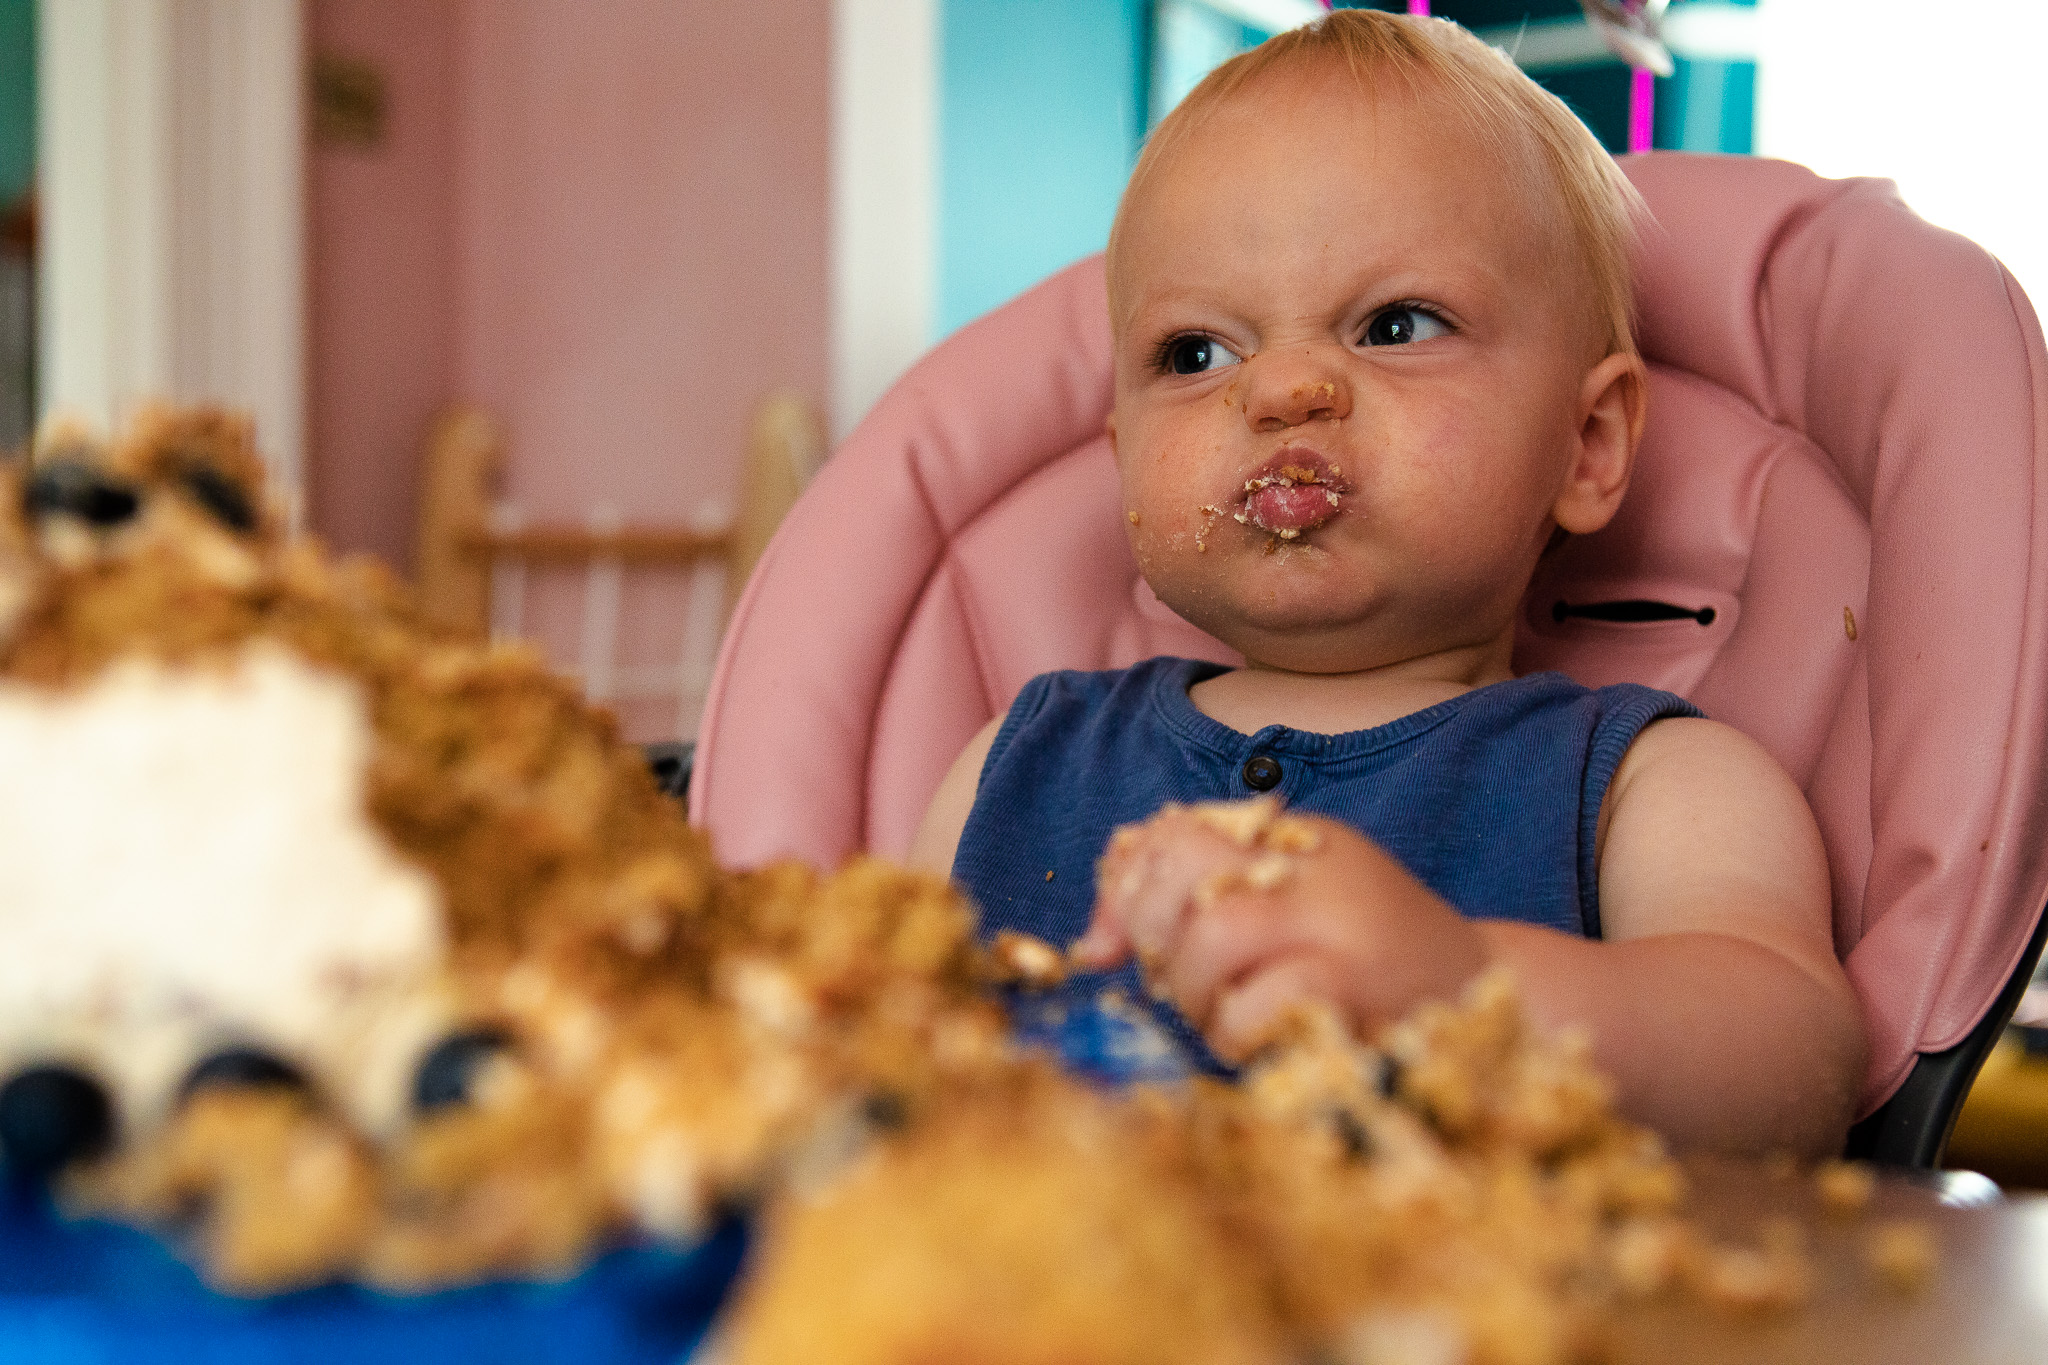 portrait of a baby during a cake smash scrunching up its face and eating a blueberry cake